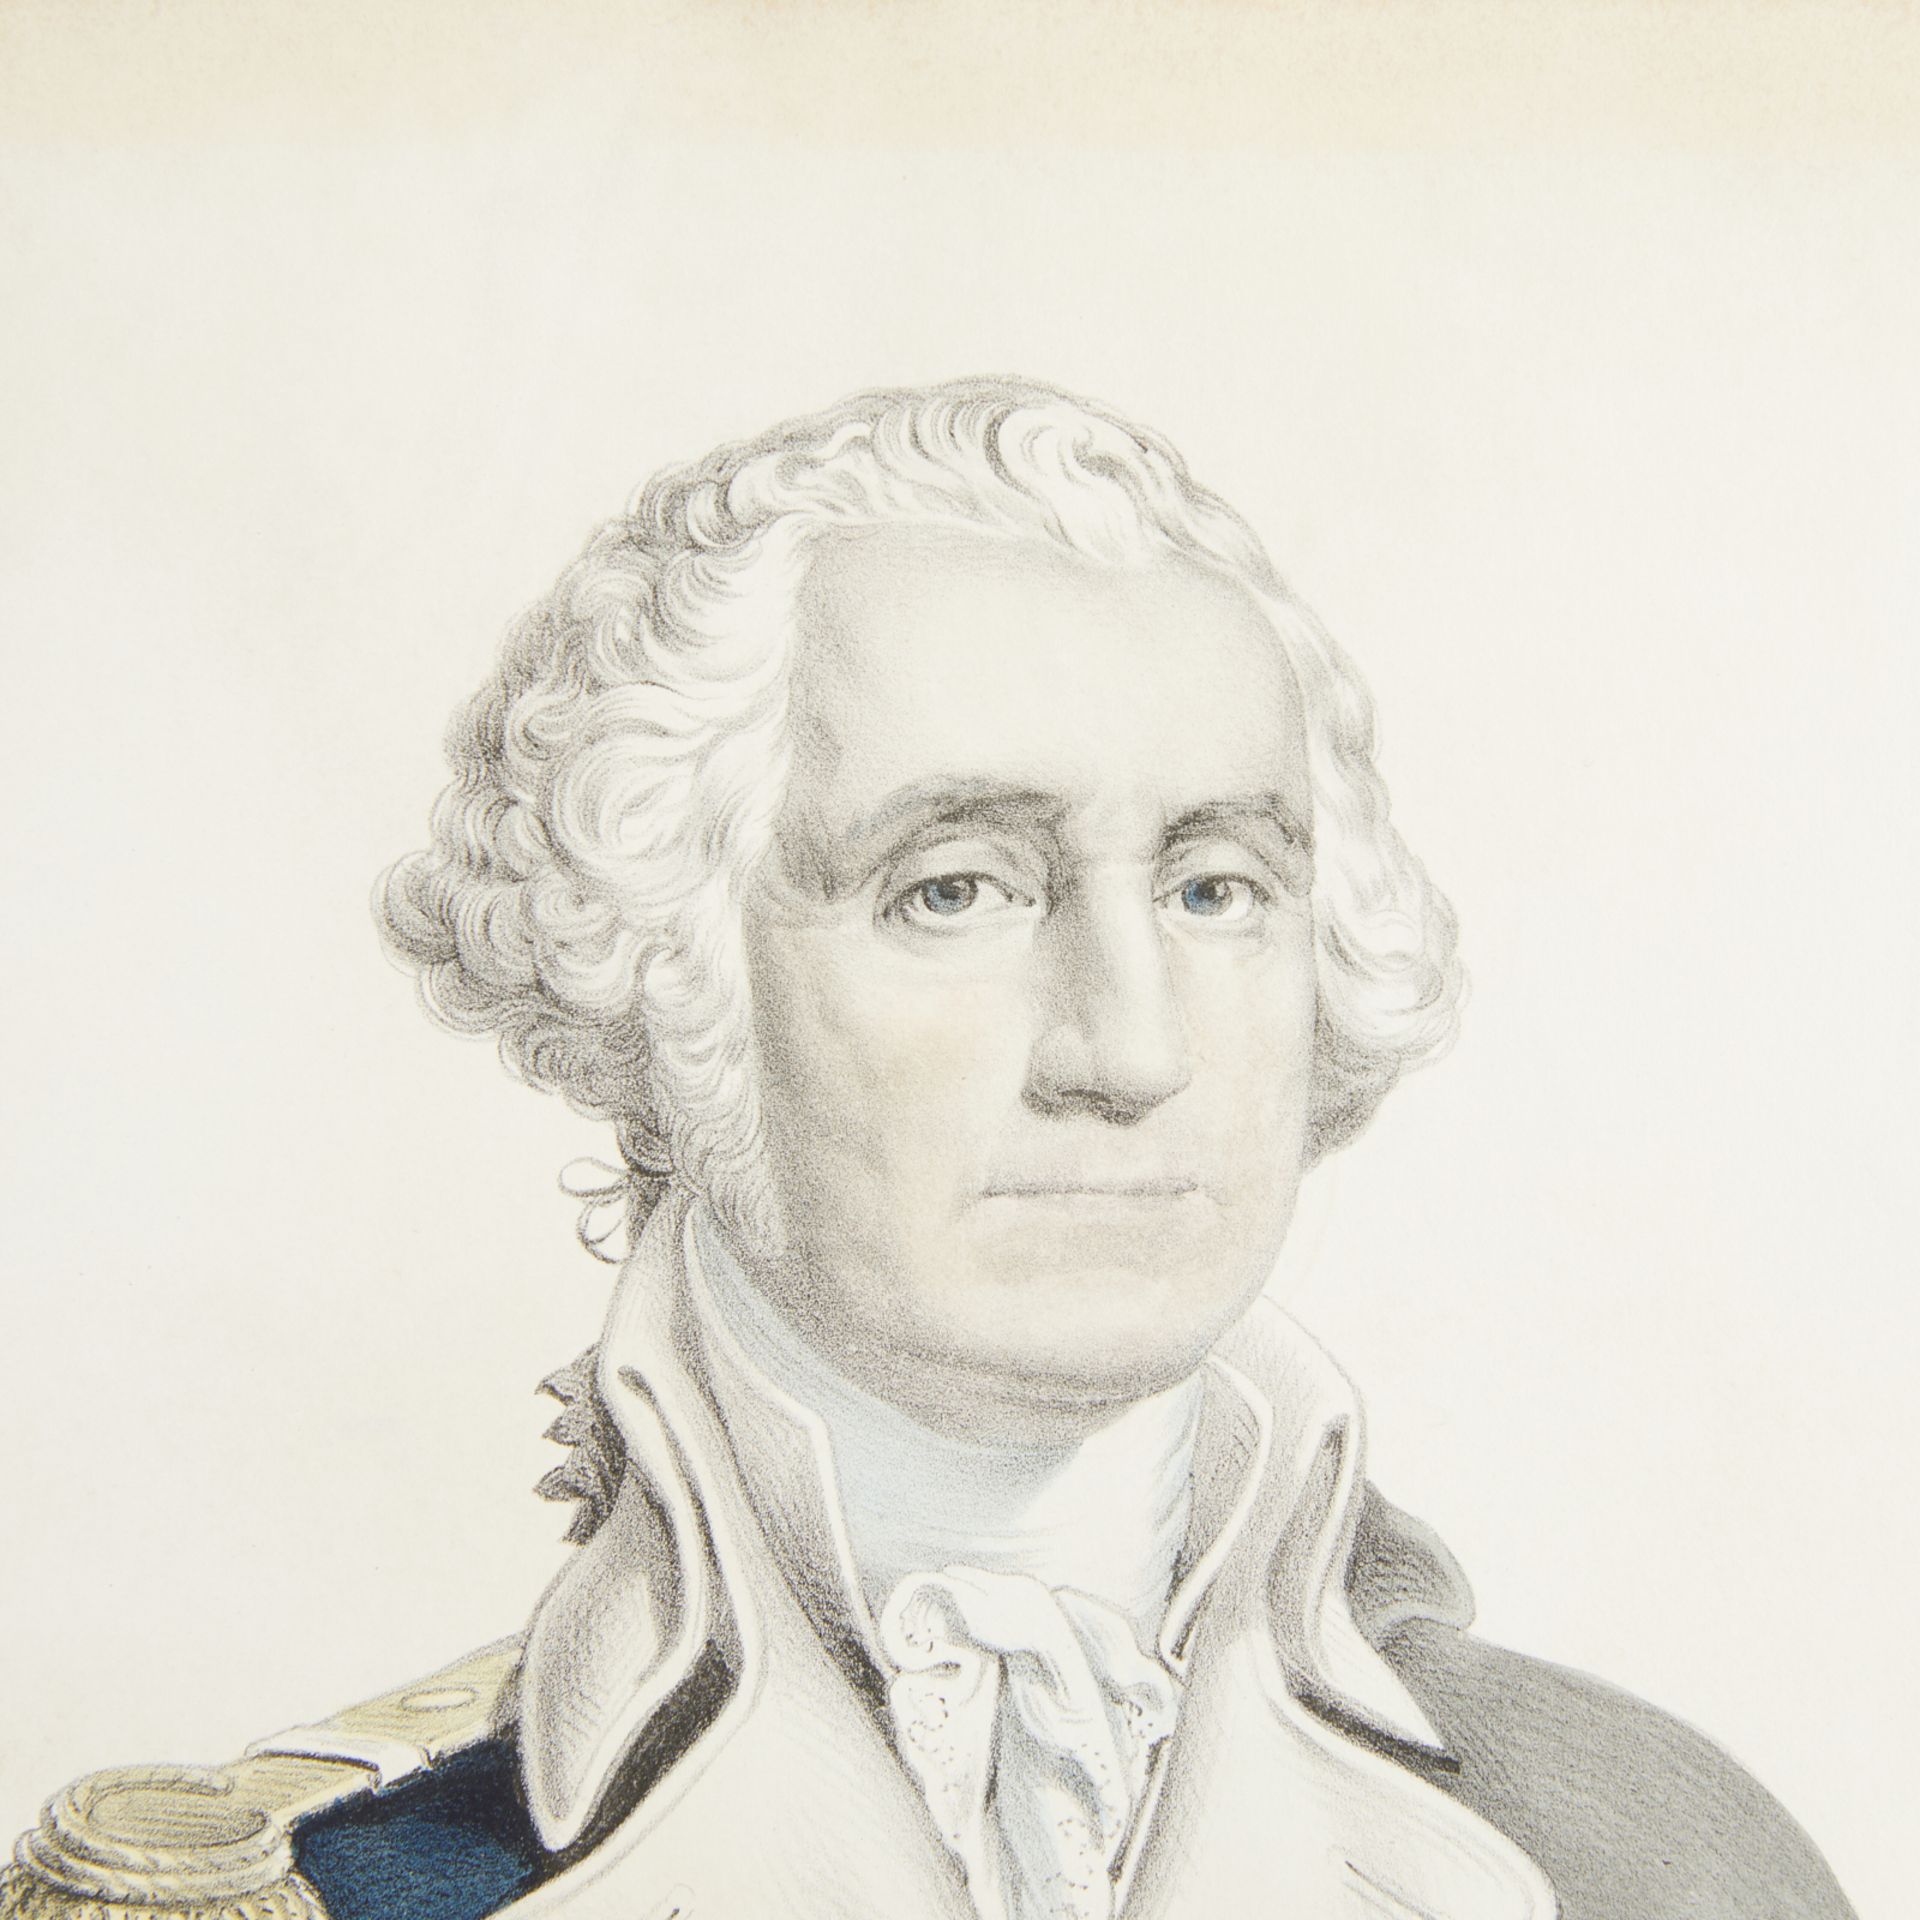 Currier & Ives "George Washington" Small Print - Image 6 of 6